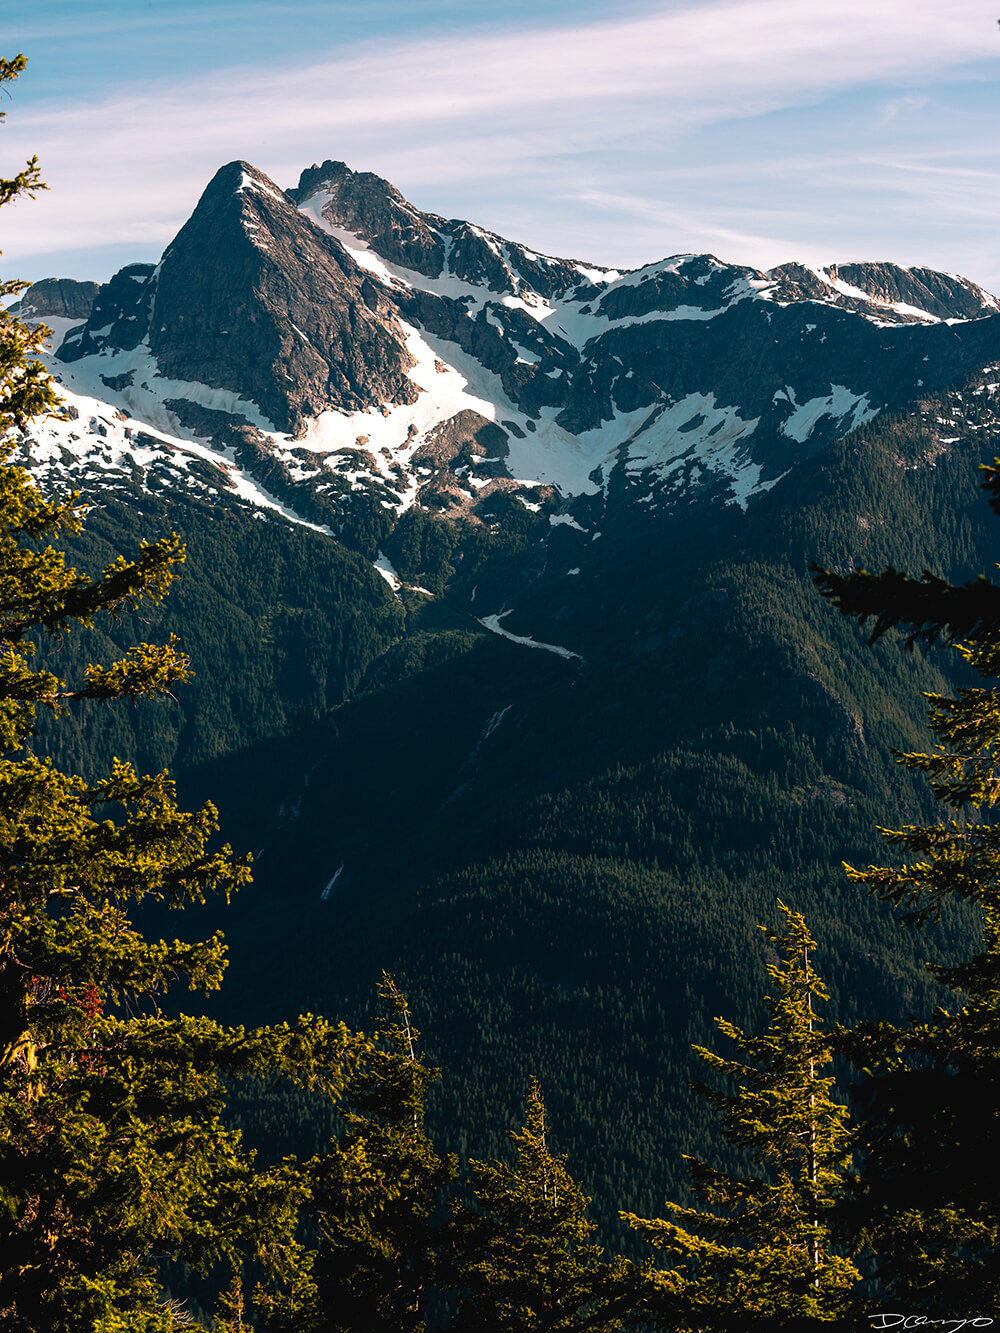 Landscape and portrait photos from a July 2020 trip to the North Cascades. Sourdough Mountain, Diablo Lake, Ross Lake and more.